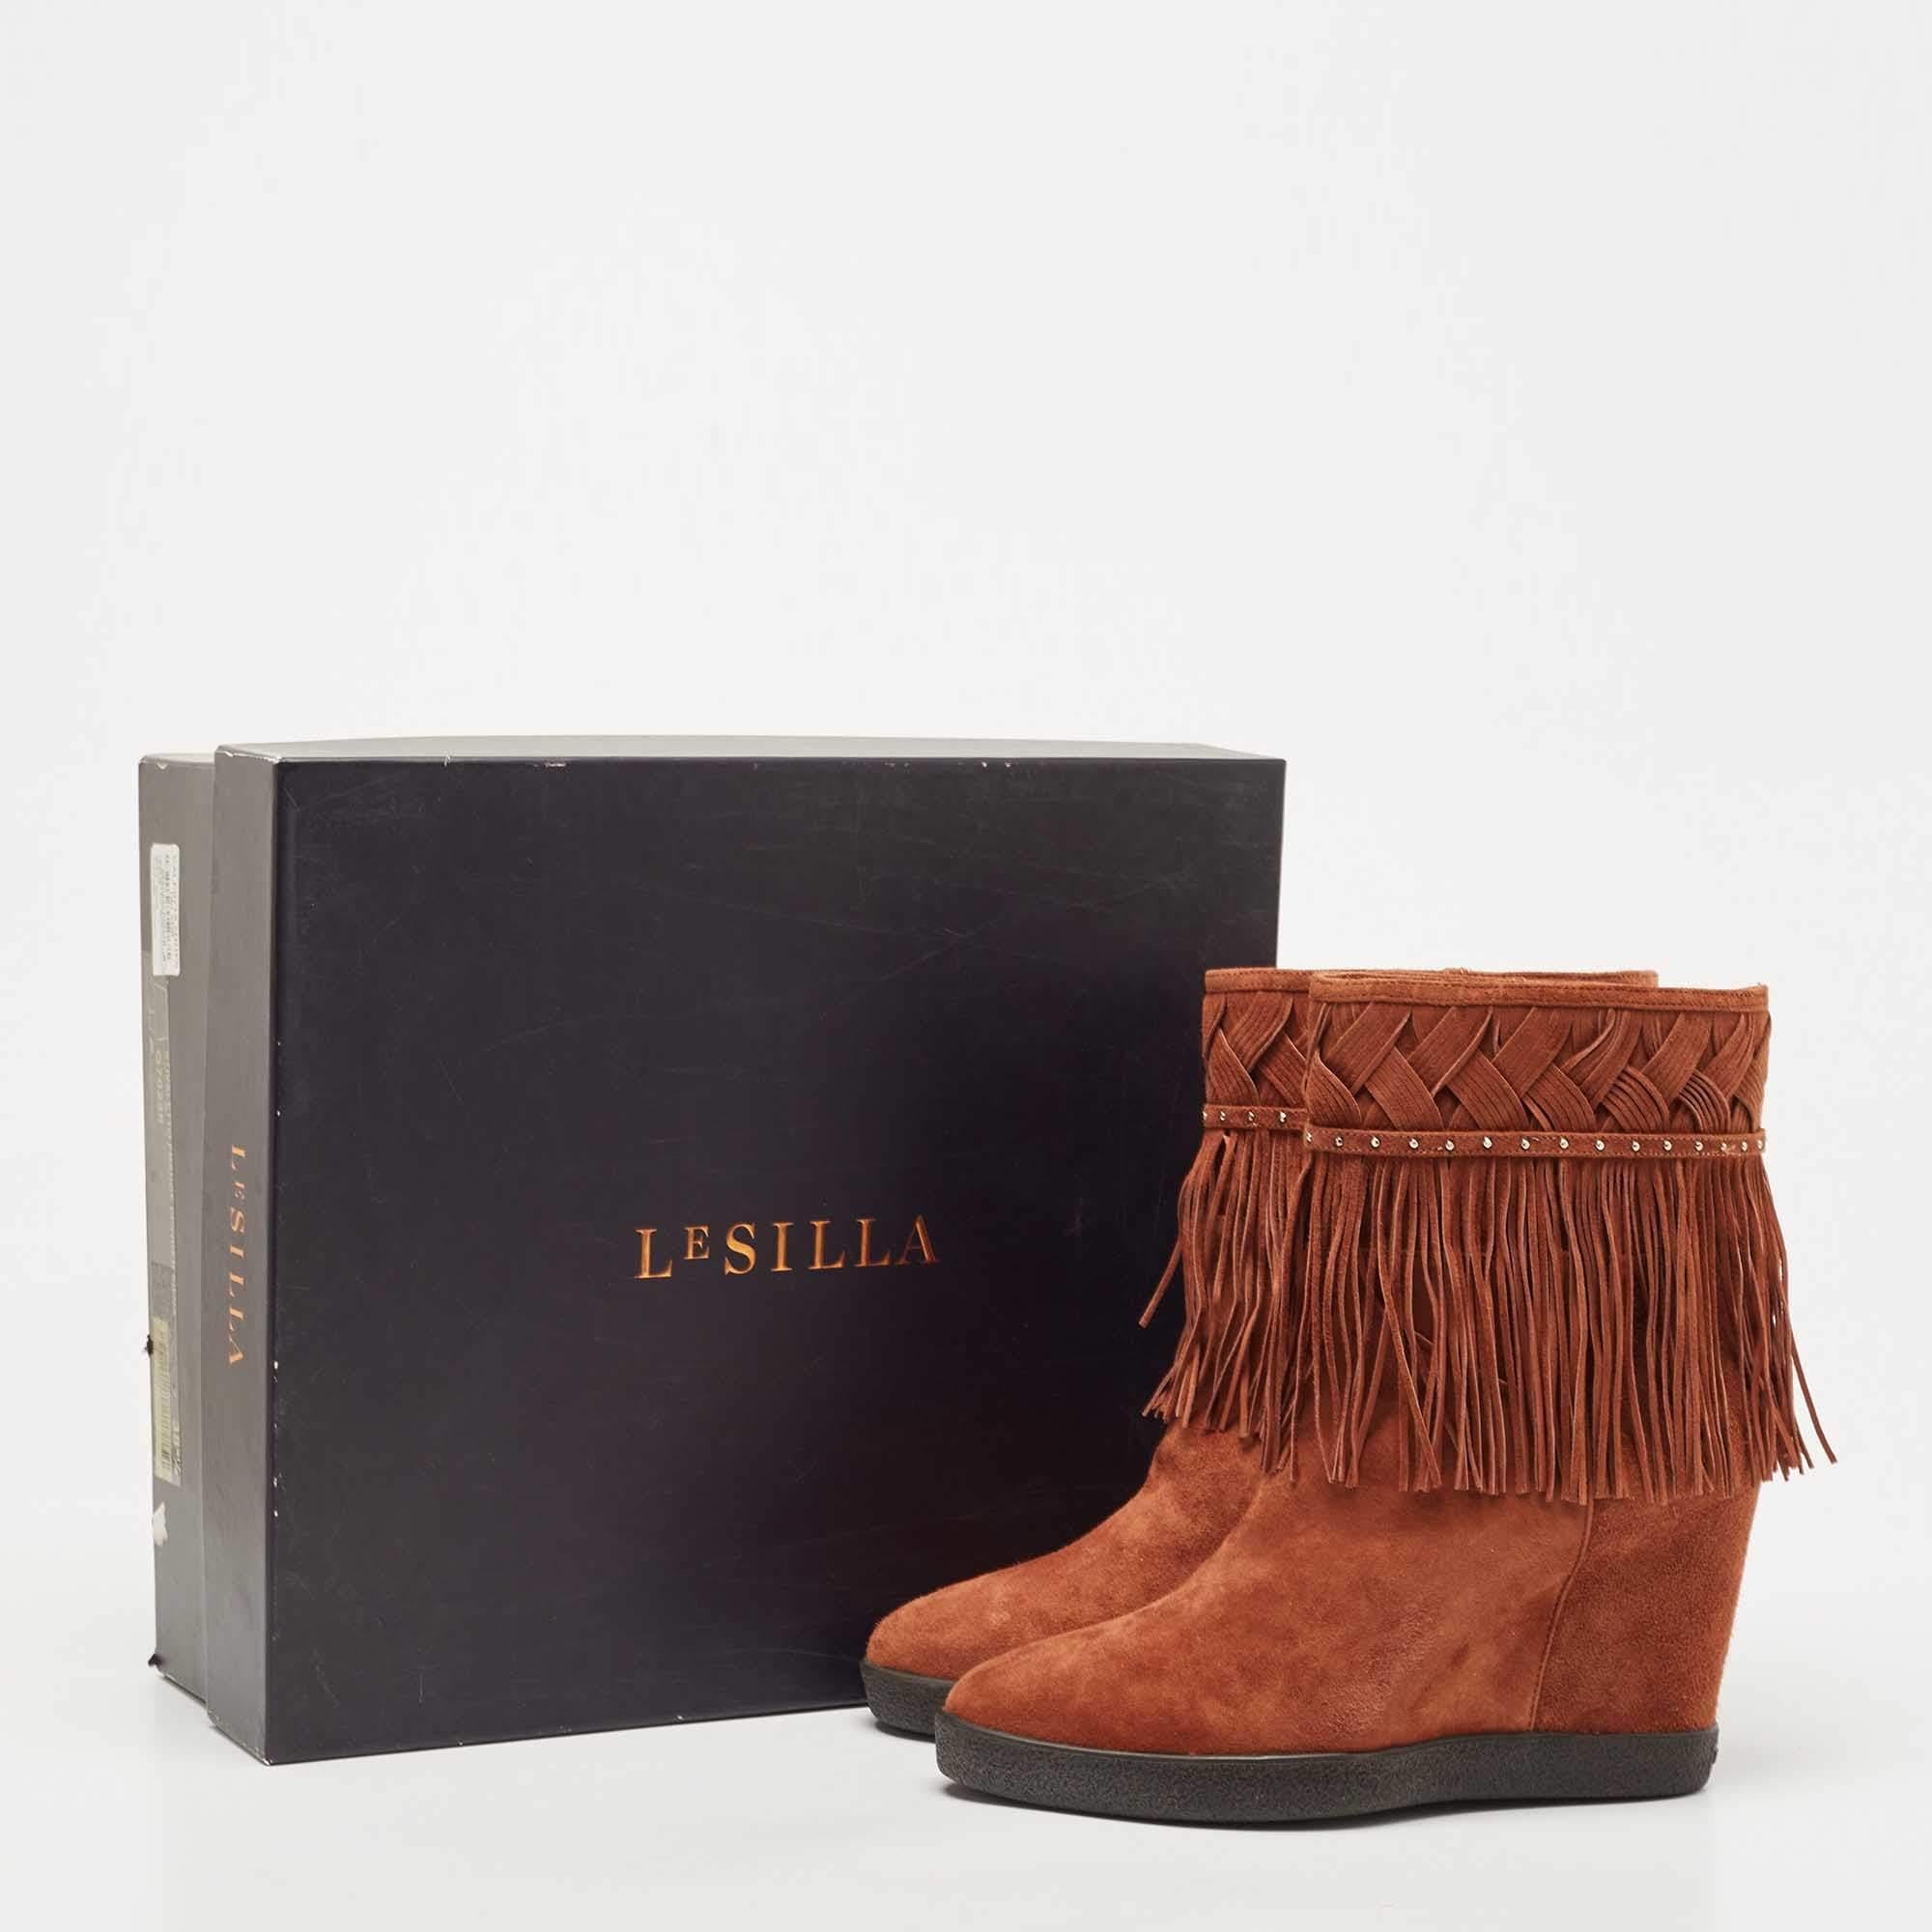 Le Silla Brown Suede Fringe Ankle Length Boots Size 38.5 4